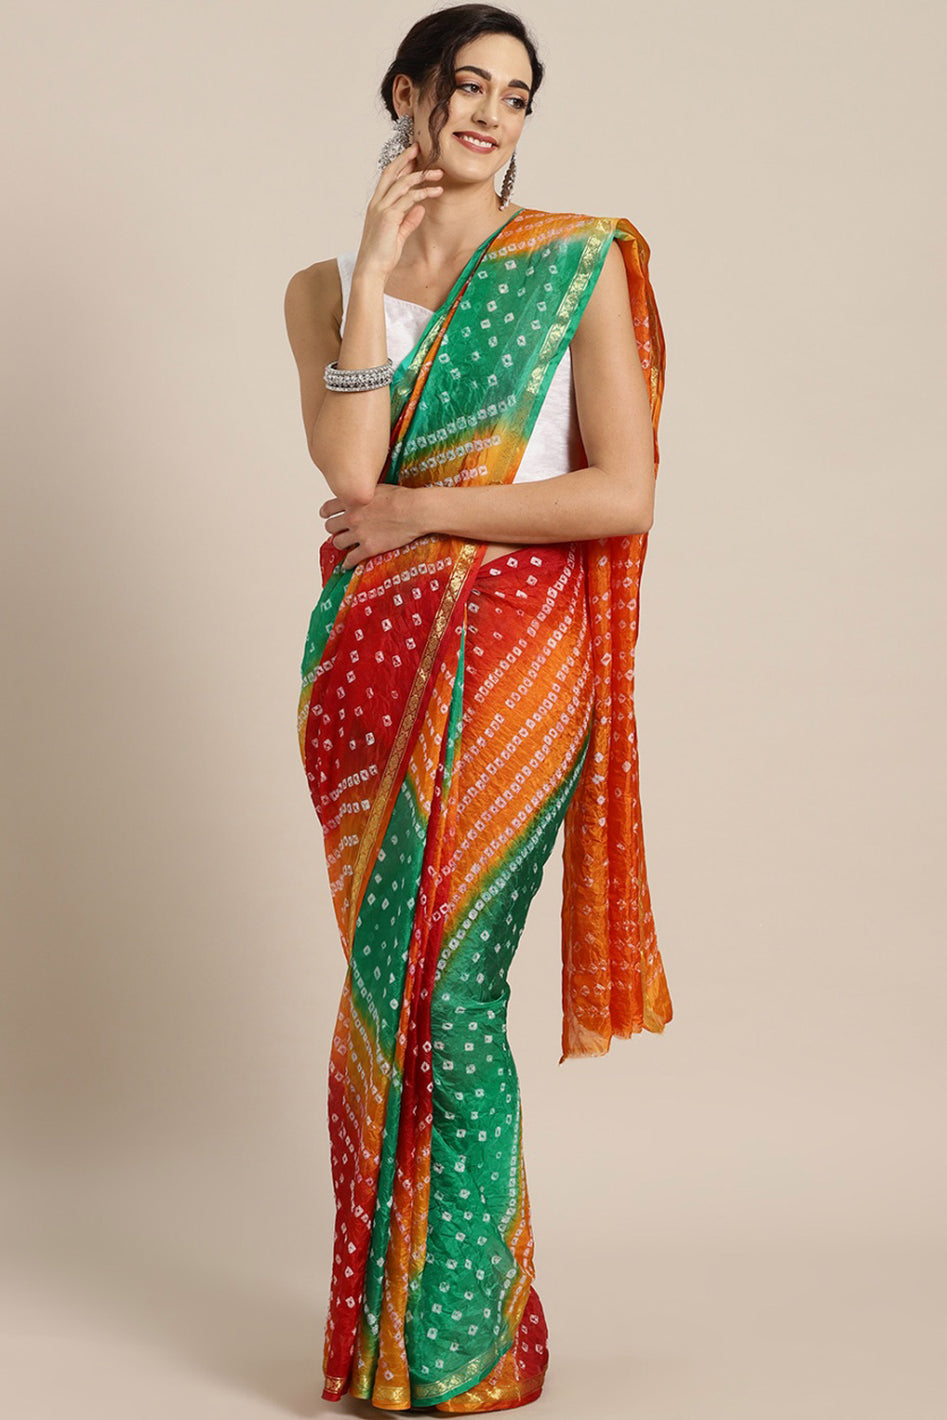 Orange Tie Dye Bandhani Saree - Indian Clothing in Denver, CO, Aurora, CO, Boulder, CO, Fort Collins, CO, Colorado Springs, CO, Parker, CO, Highlands Ranch, CO, Cherry Creek, CO, Centennial, CO, and Longmont, CO. Nationwide shipping USA - India Fashion X